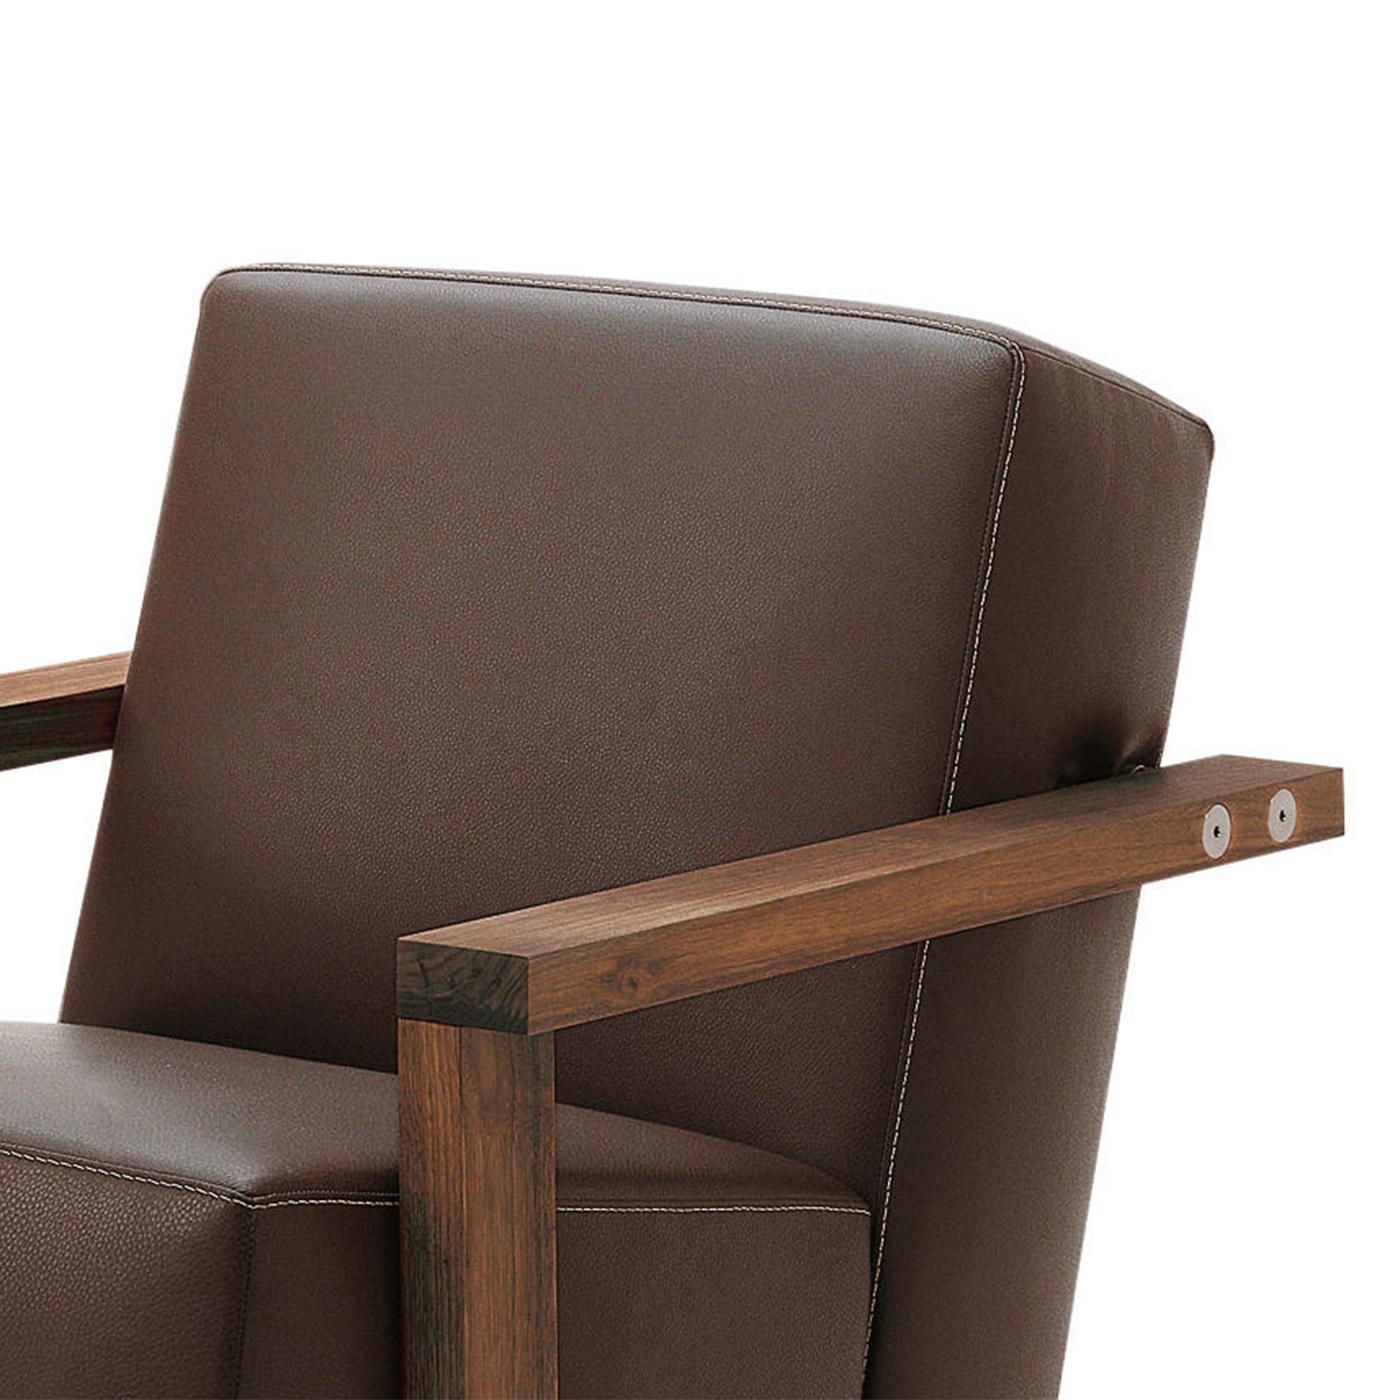 Armchair opal with structure and armrests in
solid walnut wood. Treated with natural pine
extracts. Upholstered and covered with Italian
genuine leather, category D4 in chocolate color.
Also available with solid oak structure and armrests.
Also